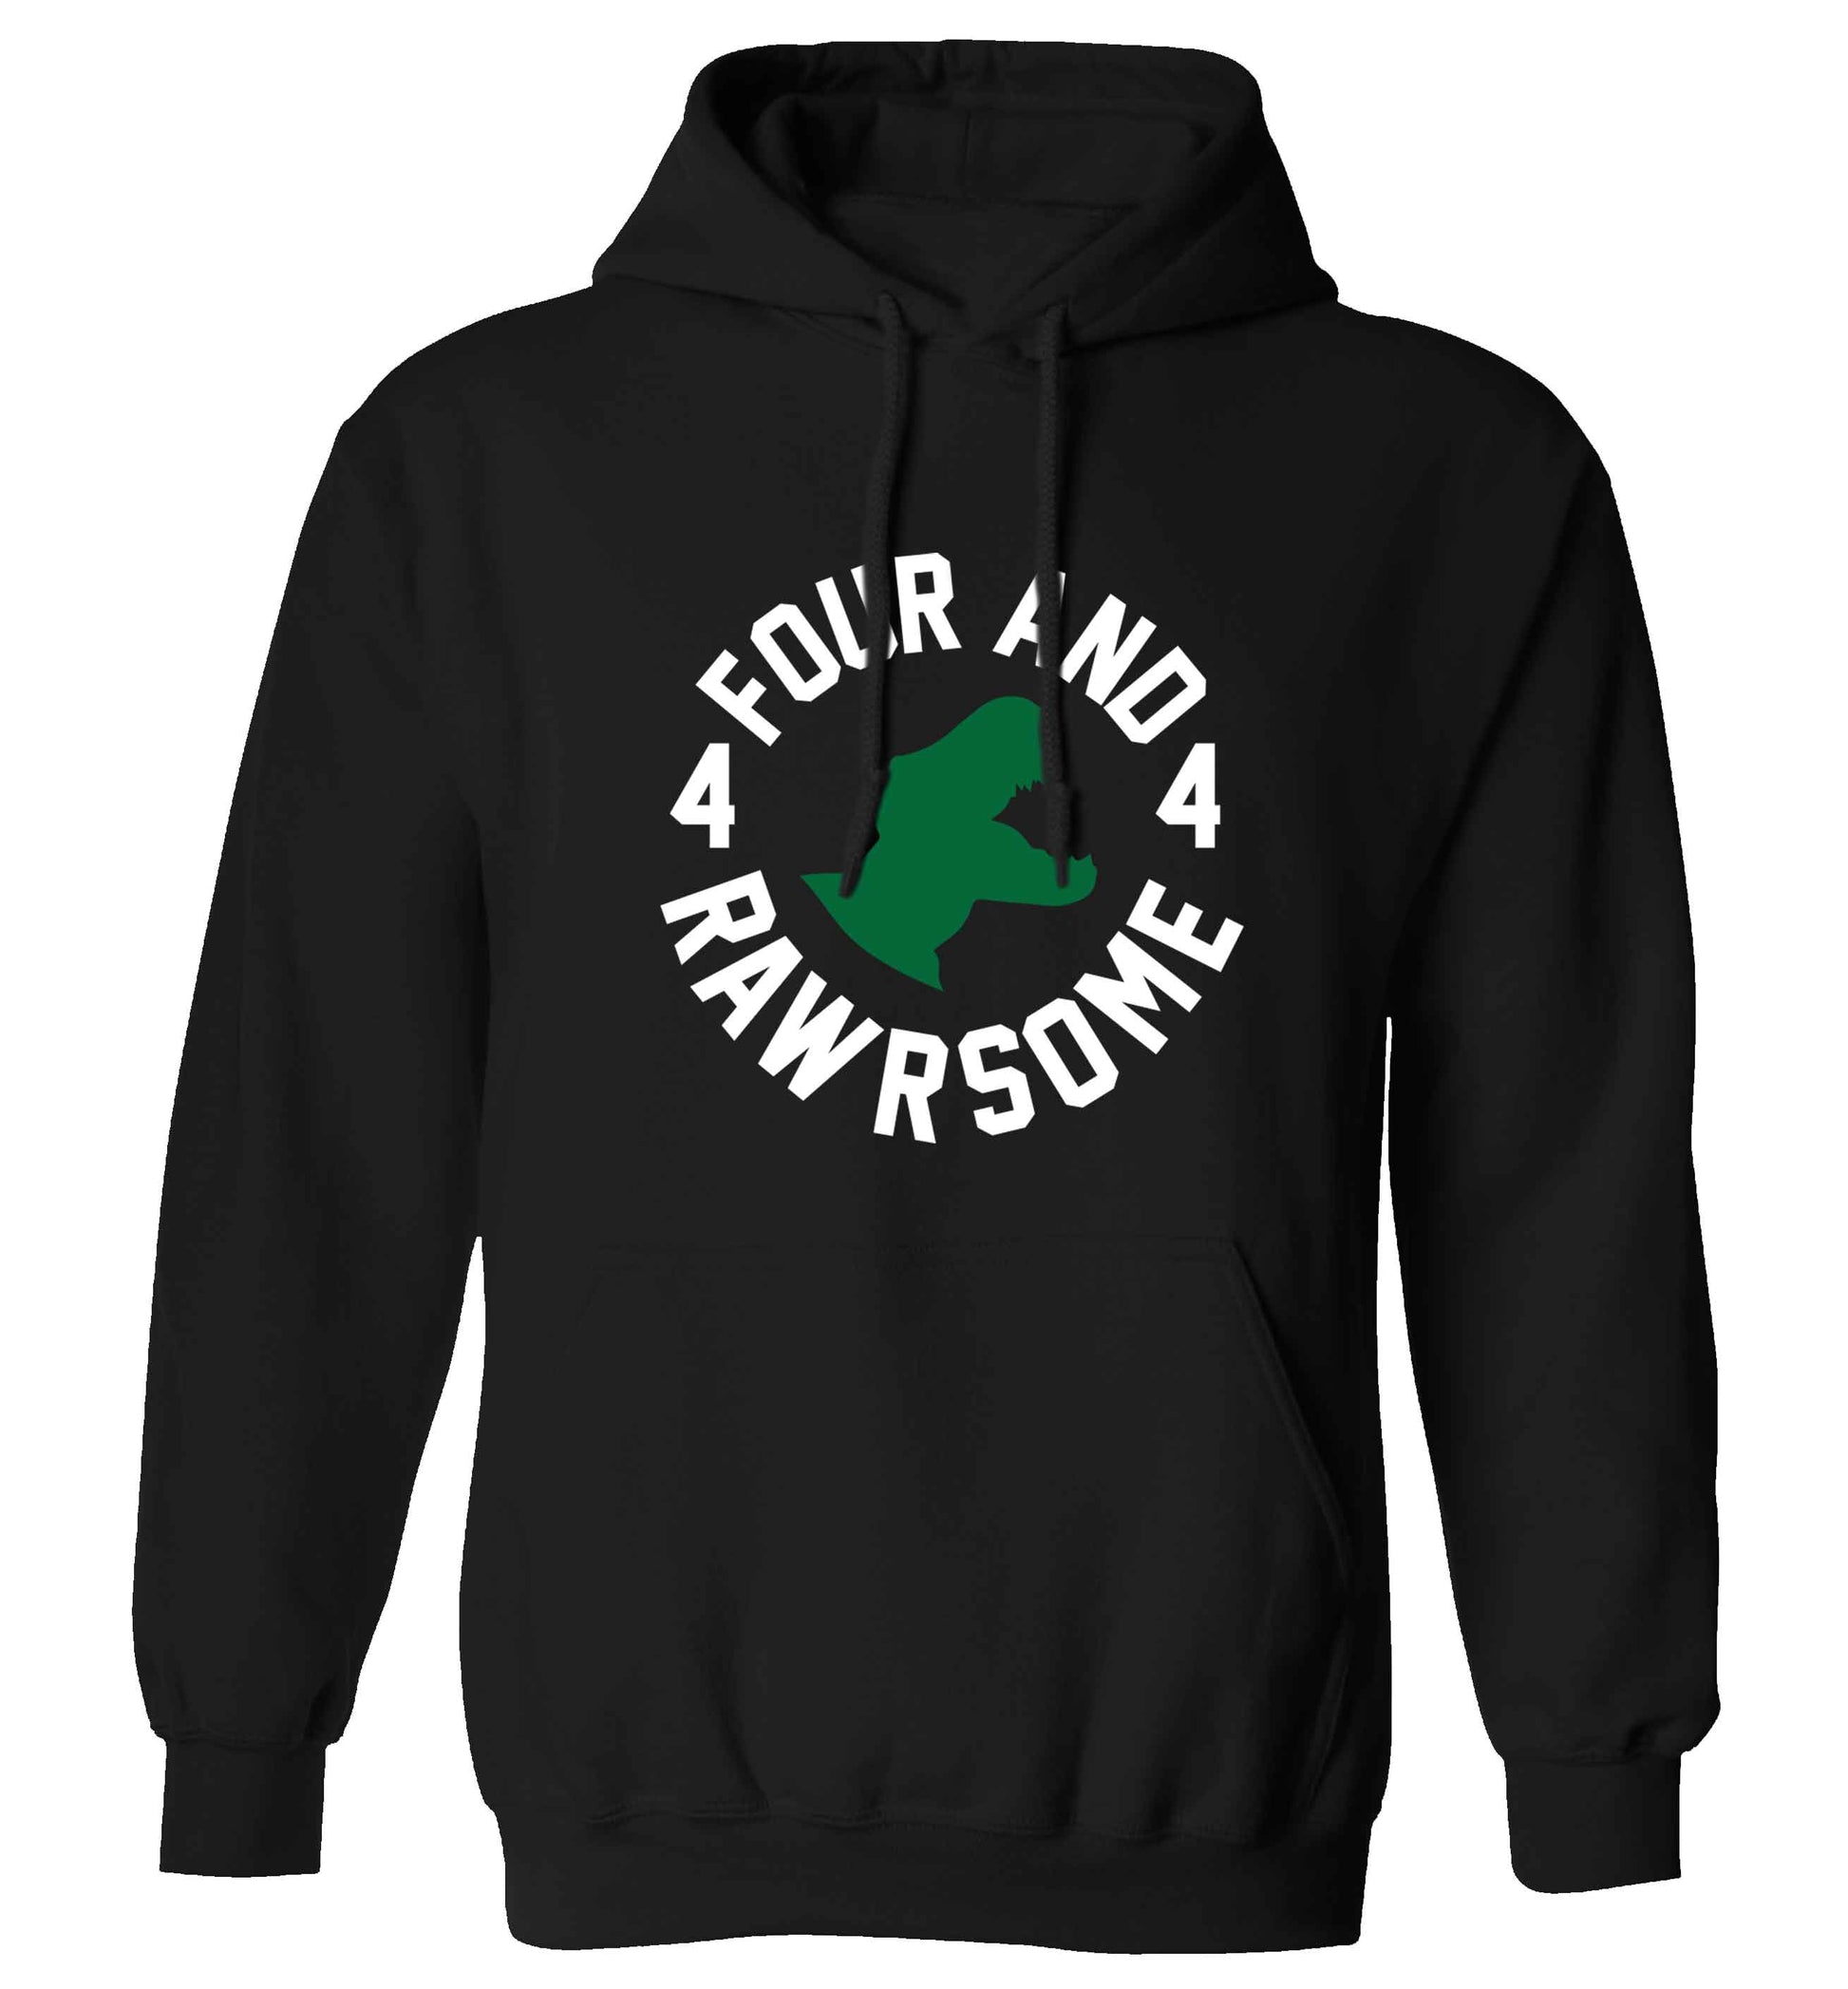 Four and rawrsome adults unisex black hoodie 2XL